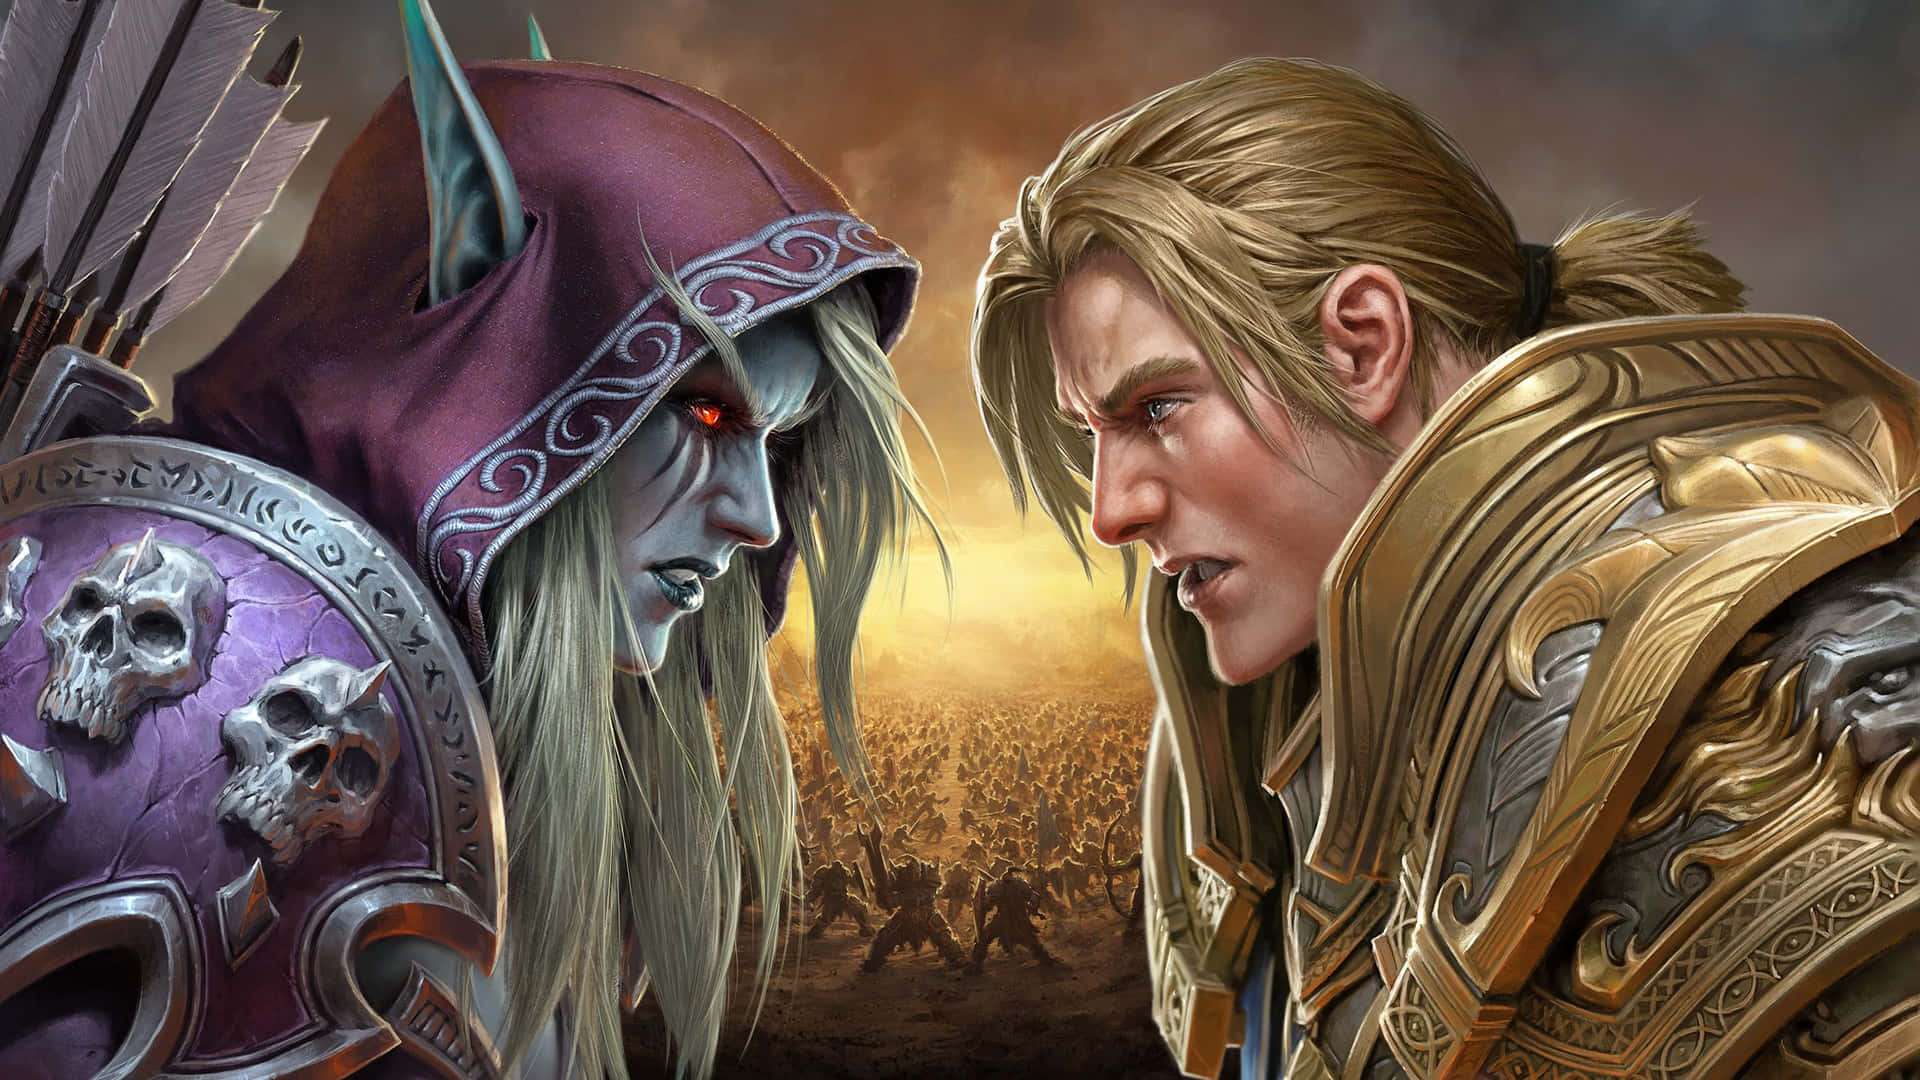 Epic Battle In A Mysterious World - Battle For Azeroth Wallpaper